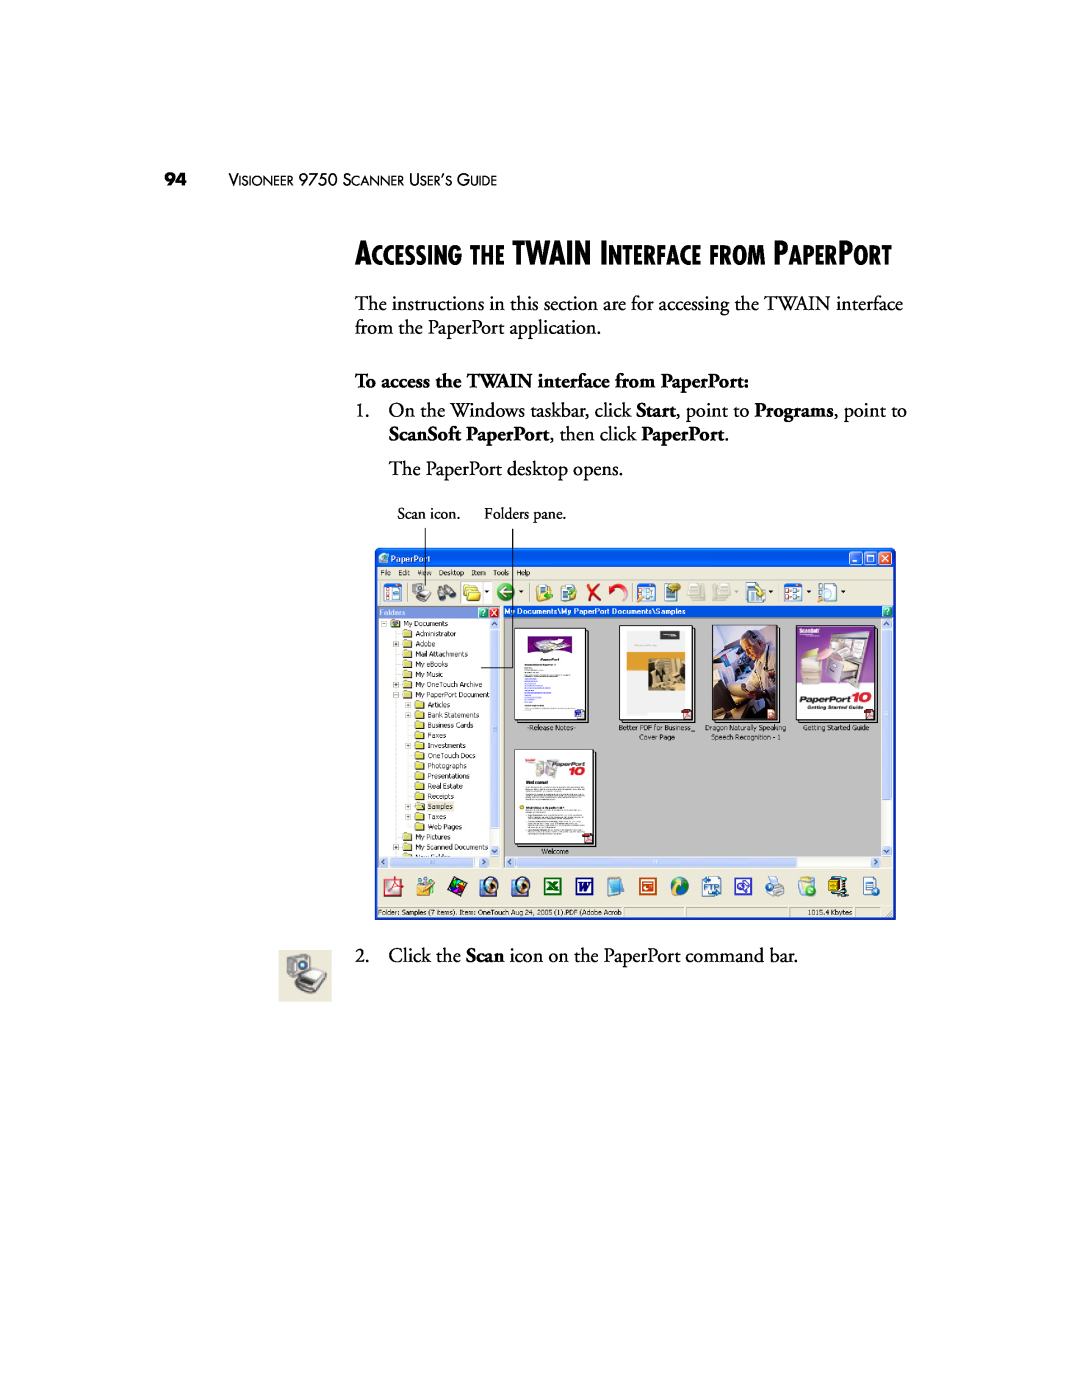 Visioneer 9750 manual Accessing The Twain Interface From Paperport, To access the TWAIN interface from PaperPort 